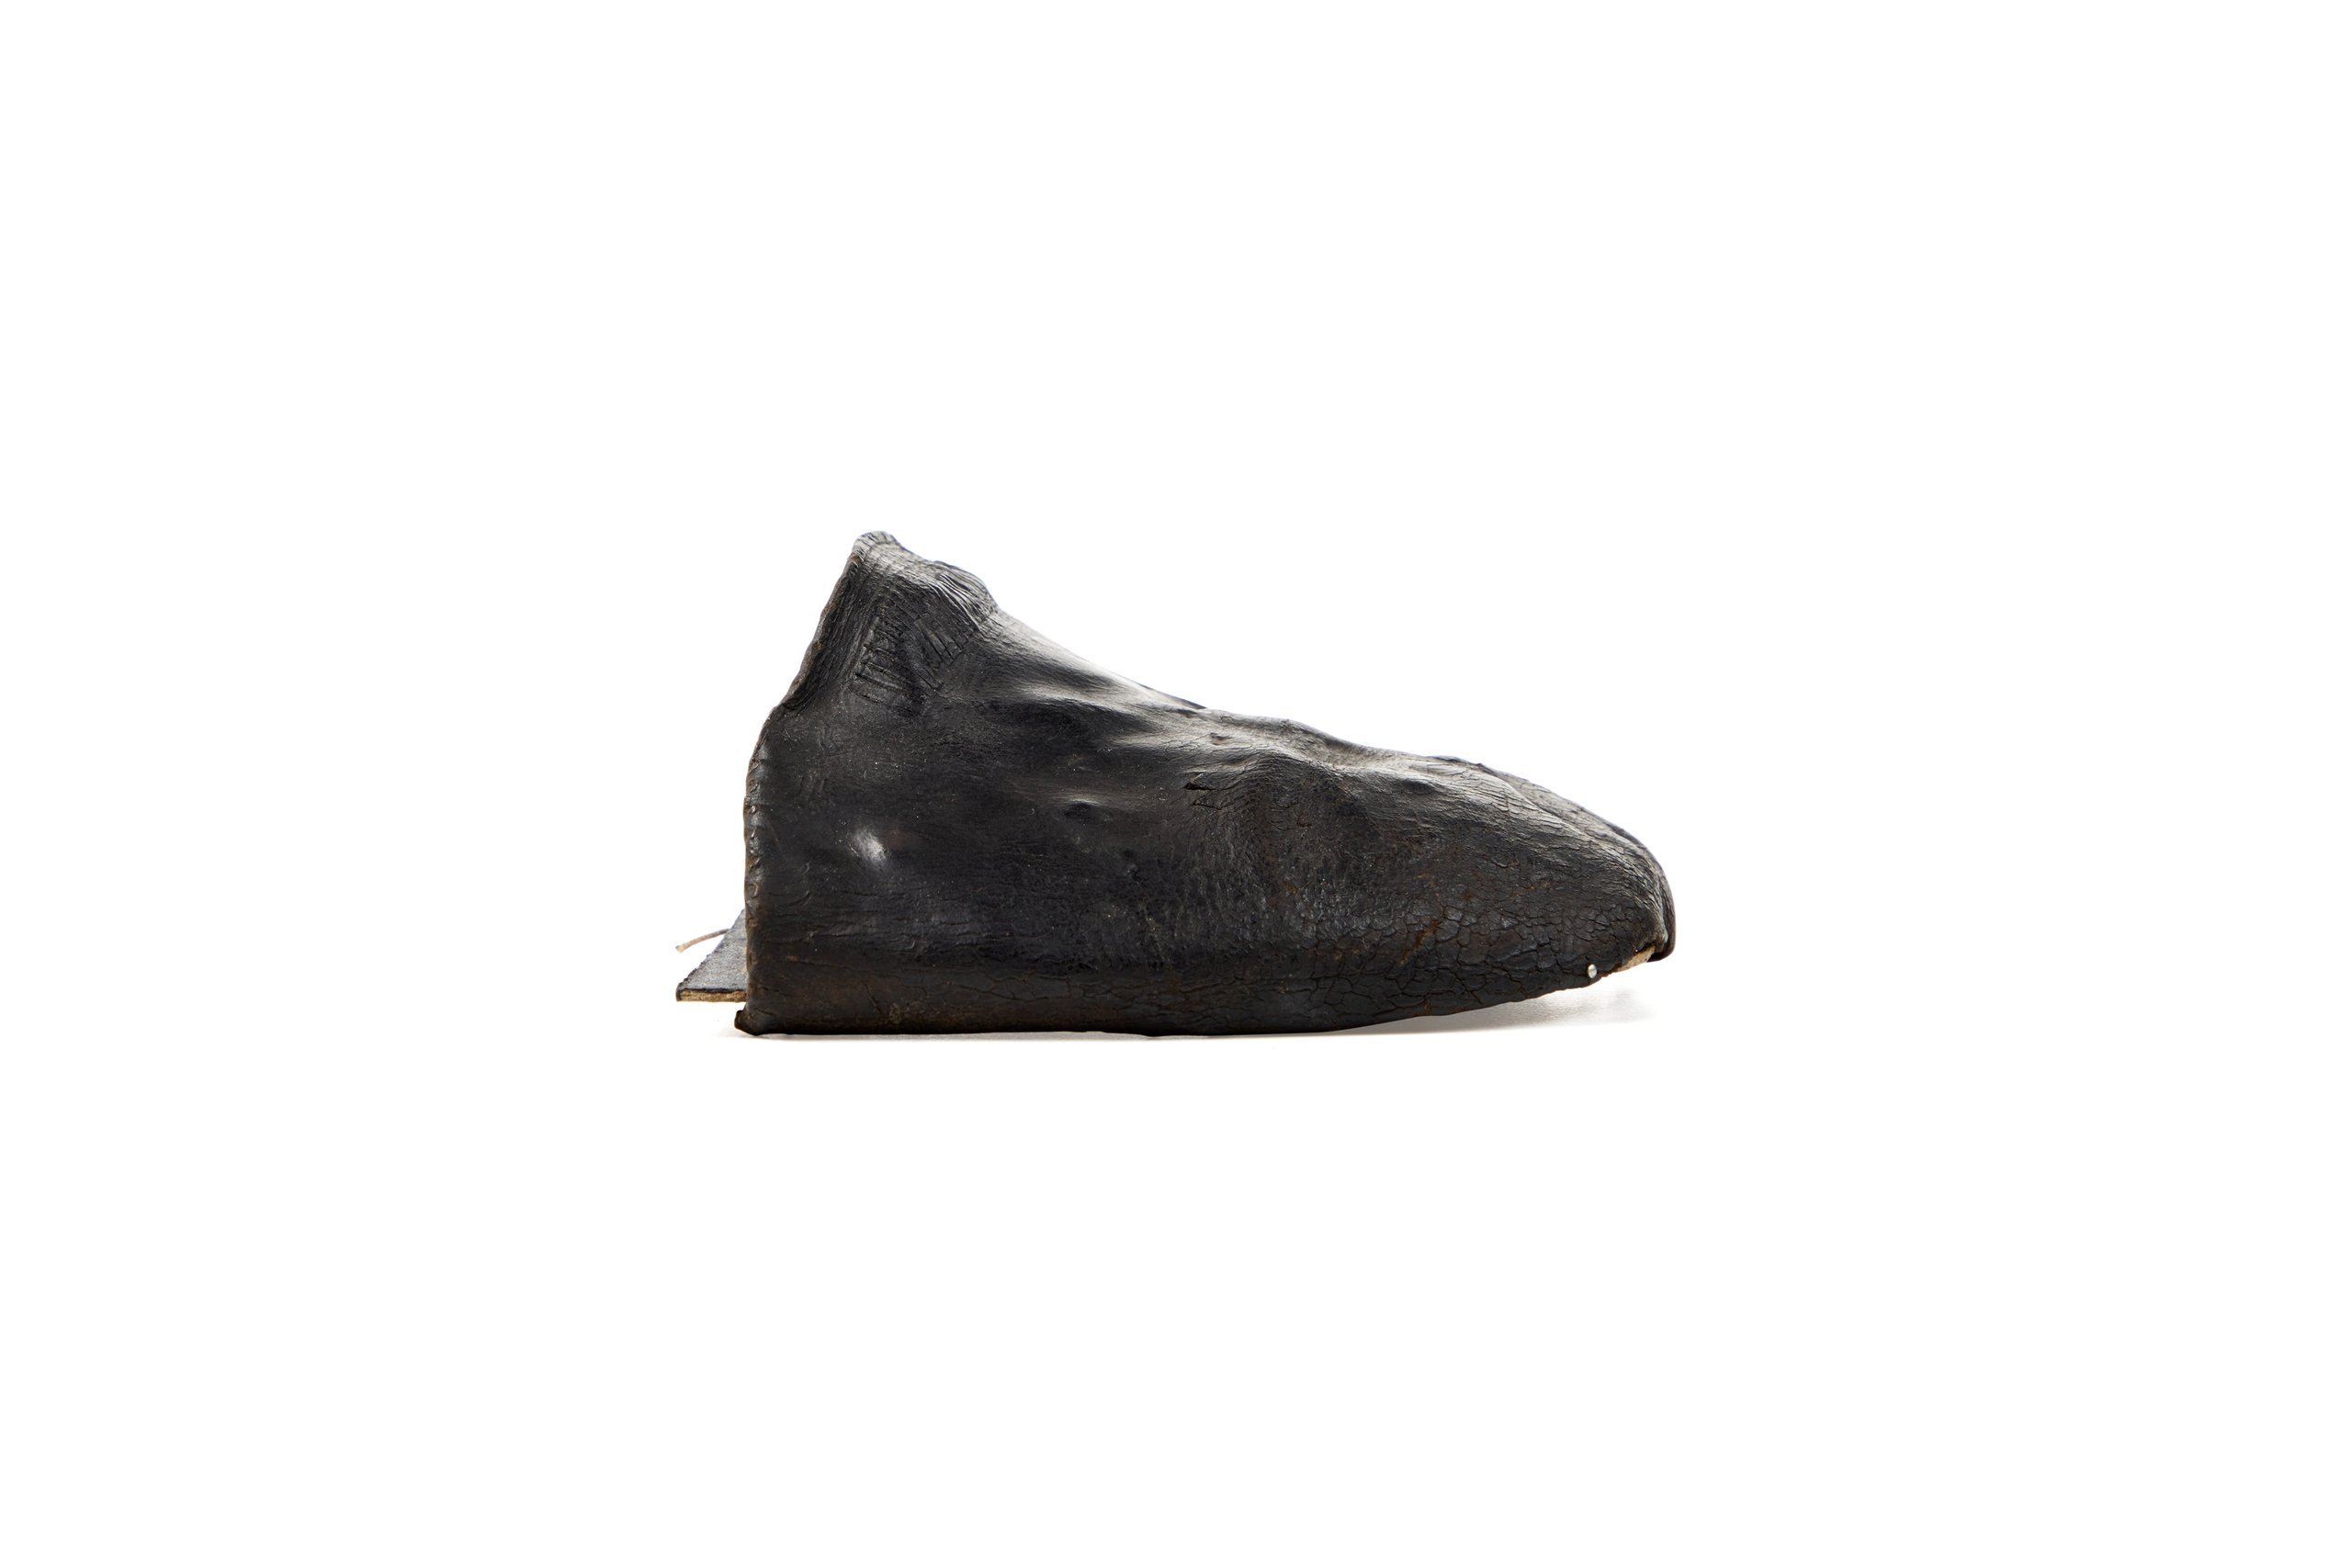 Incomplete shoe vamp from the Joseph Box collection